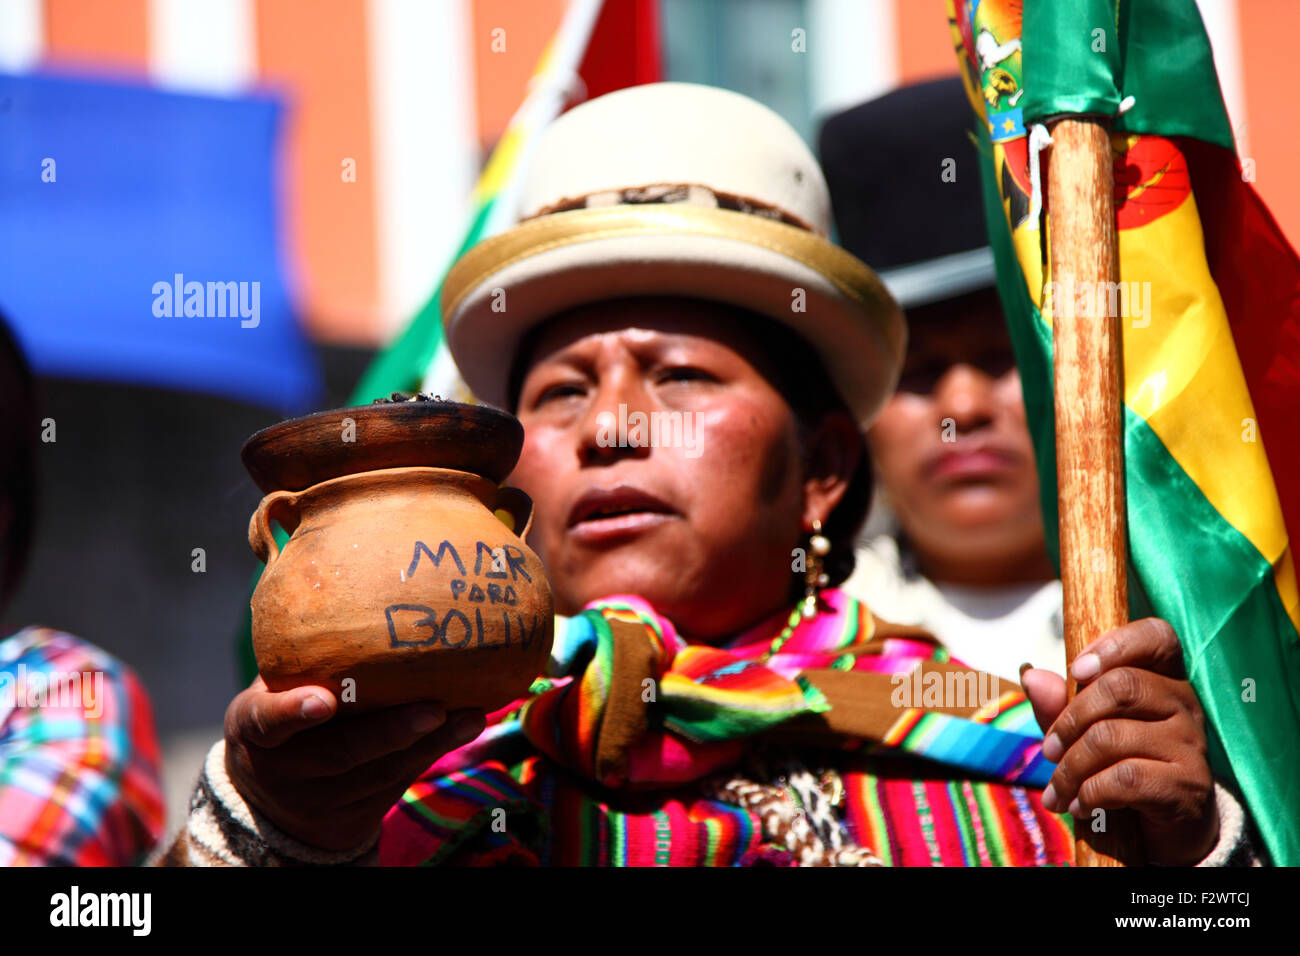 La Paz, Bolivia, 24th September 2015. An Aymara shaman holds a ceramic incense burner with Mar Para Bolivia / Sea For Bolivia written on it at an event to celebrate the verdict of the International Court of Justice in The Hague that it did have jurisdiction to judge Bolivia's case against Chile. Bolivia asked the ICJ in 2013 to demand that Chile negotiated access to the Pacific Ocean for Bolivia (Bolivia lost its coastal province to Chile during the War of the Pacific (1879-1884)). Chile raised an objection that the case wasn't within the ICJ's jurisdiction. © James Brunker/Alamy Live Stock Photo